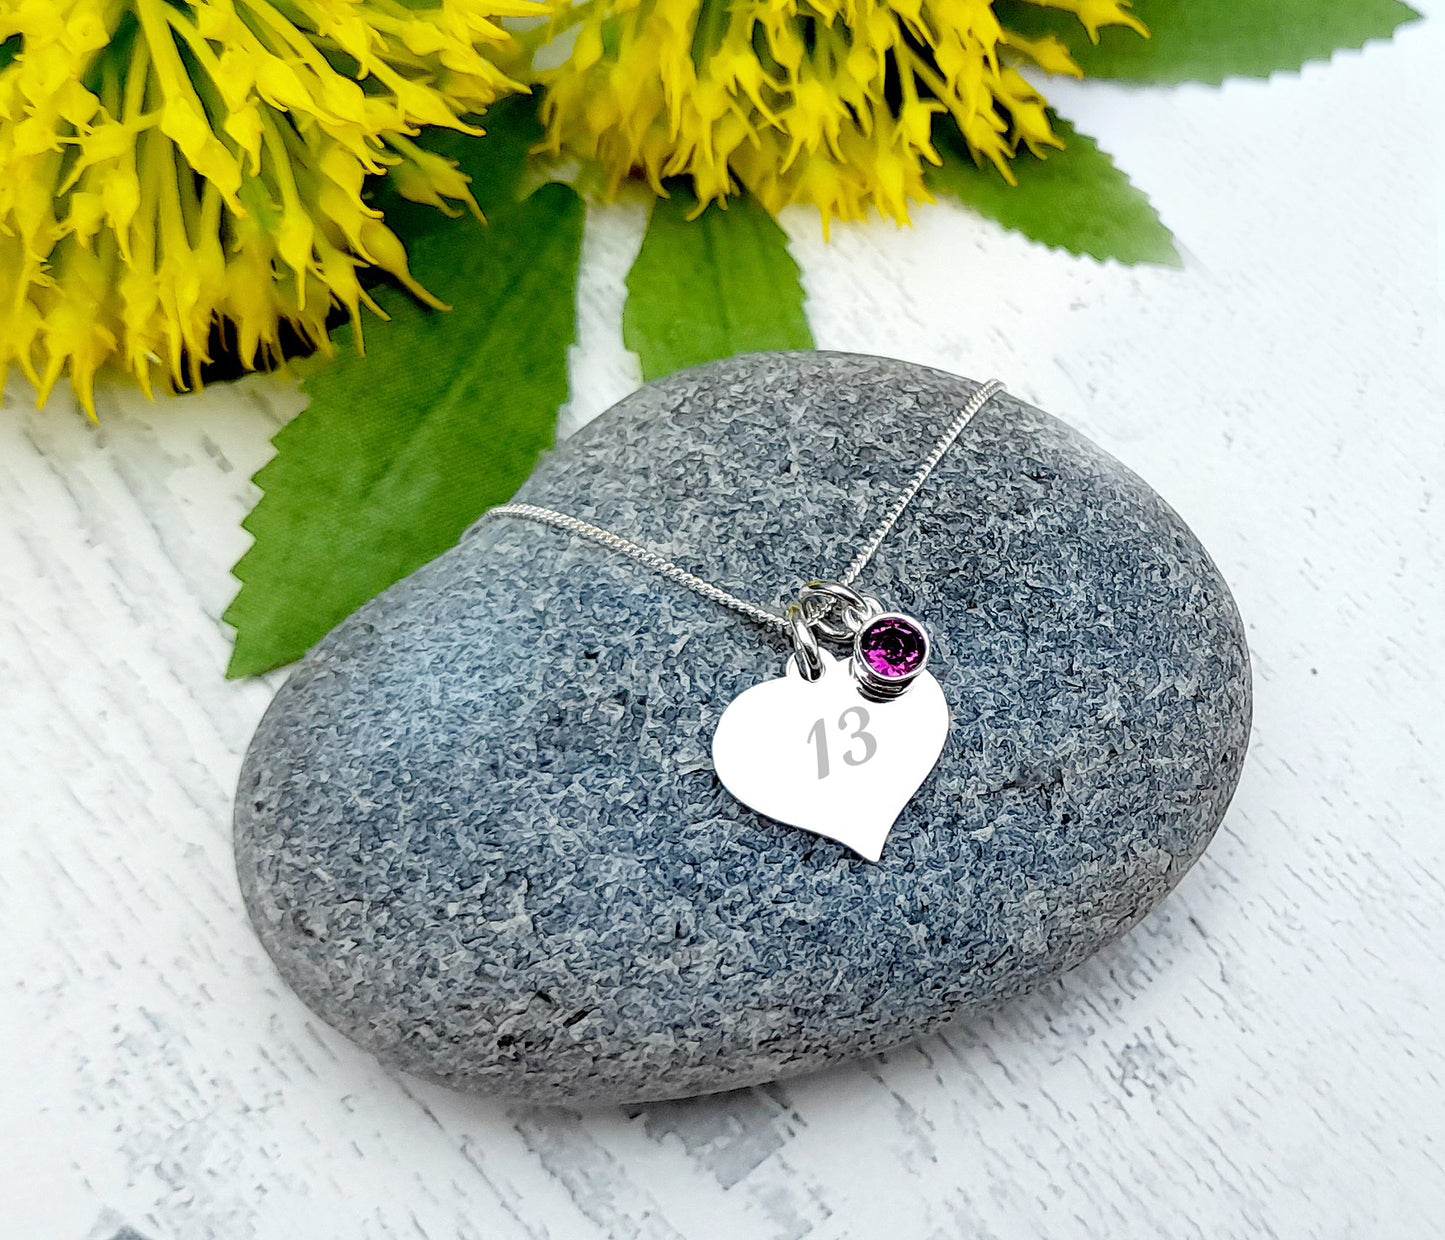 13th Birthday Gift, Engraved Heart Birthstone Necklace 925 Sterling Silver, Personalised Necklace, Message Jewellery